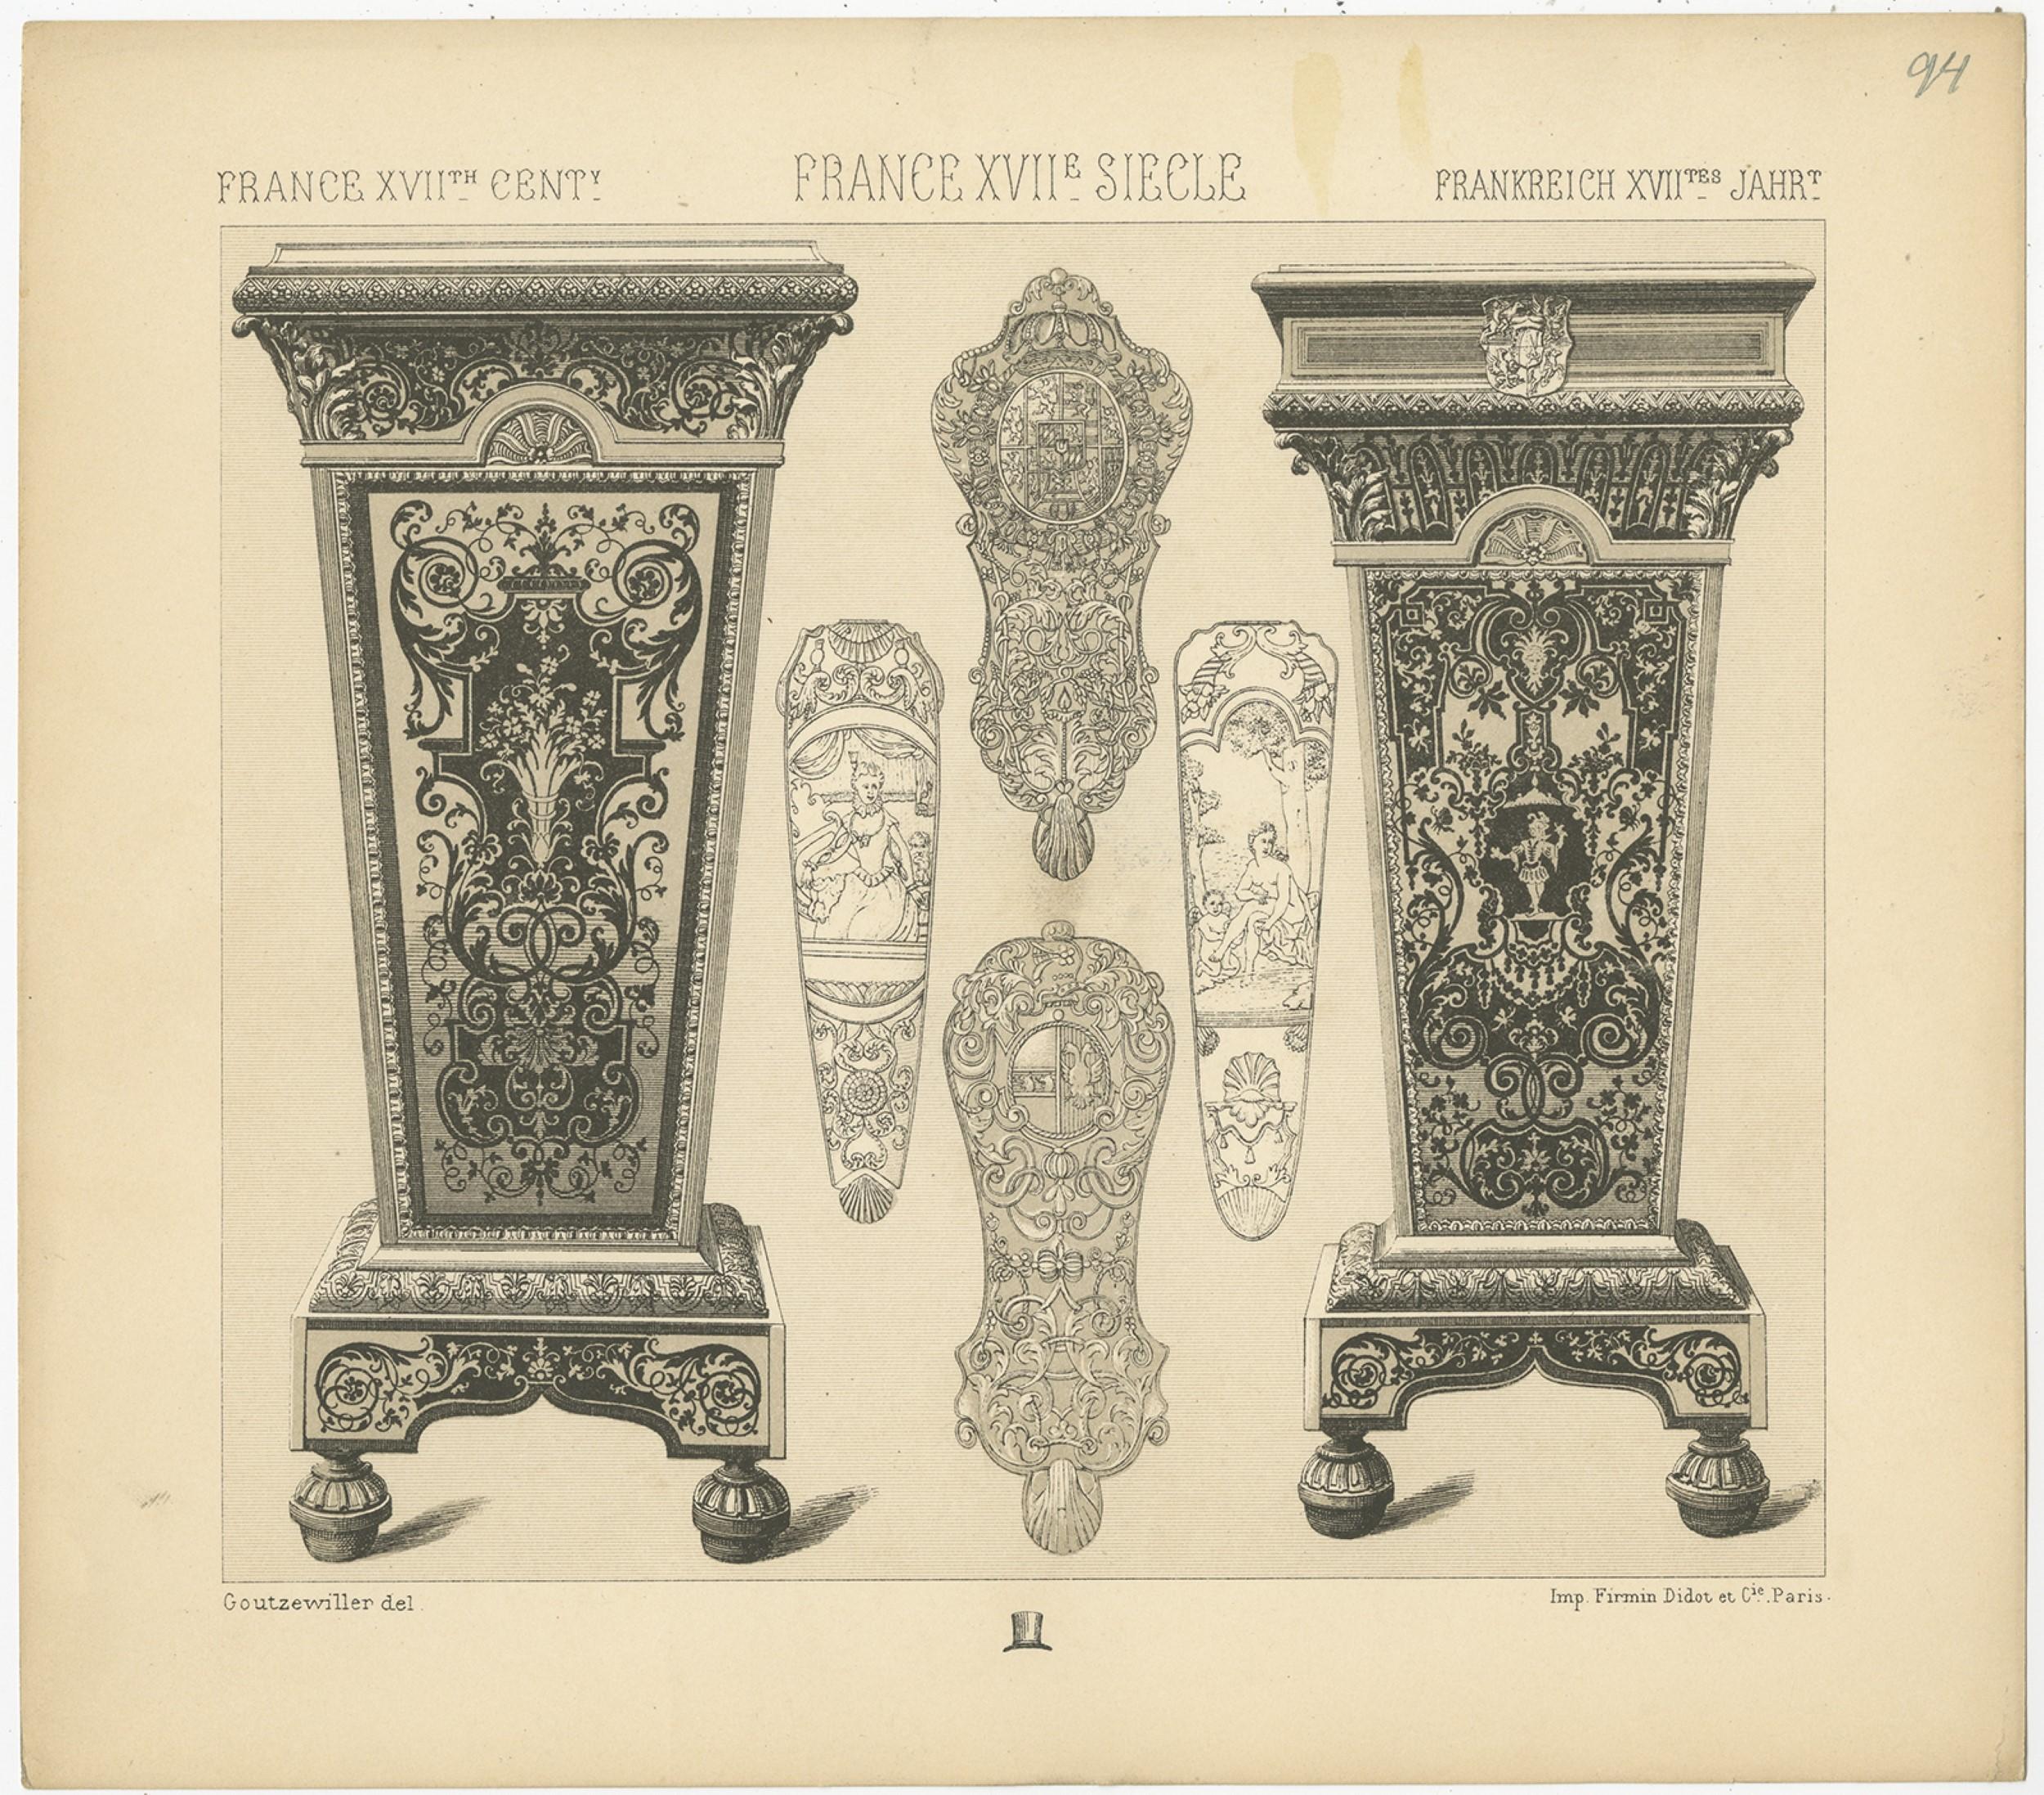 Antique print titled 'France XVIIth Cent - France XVIIe Siecle - Frankreich XVIItes Jahr'. Chromolithograph of French 17th century decoration. This print originates from 'Le Costume Historique' by M.A. Racinet. Published circa 1880.